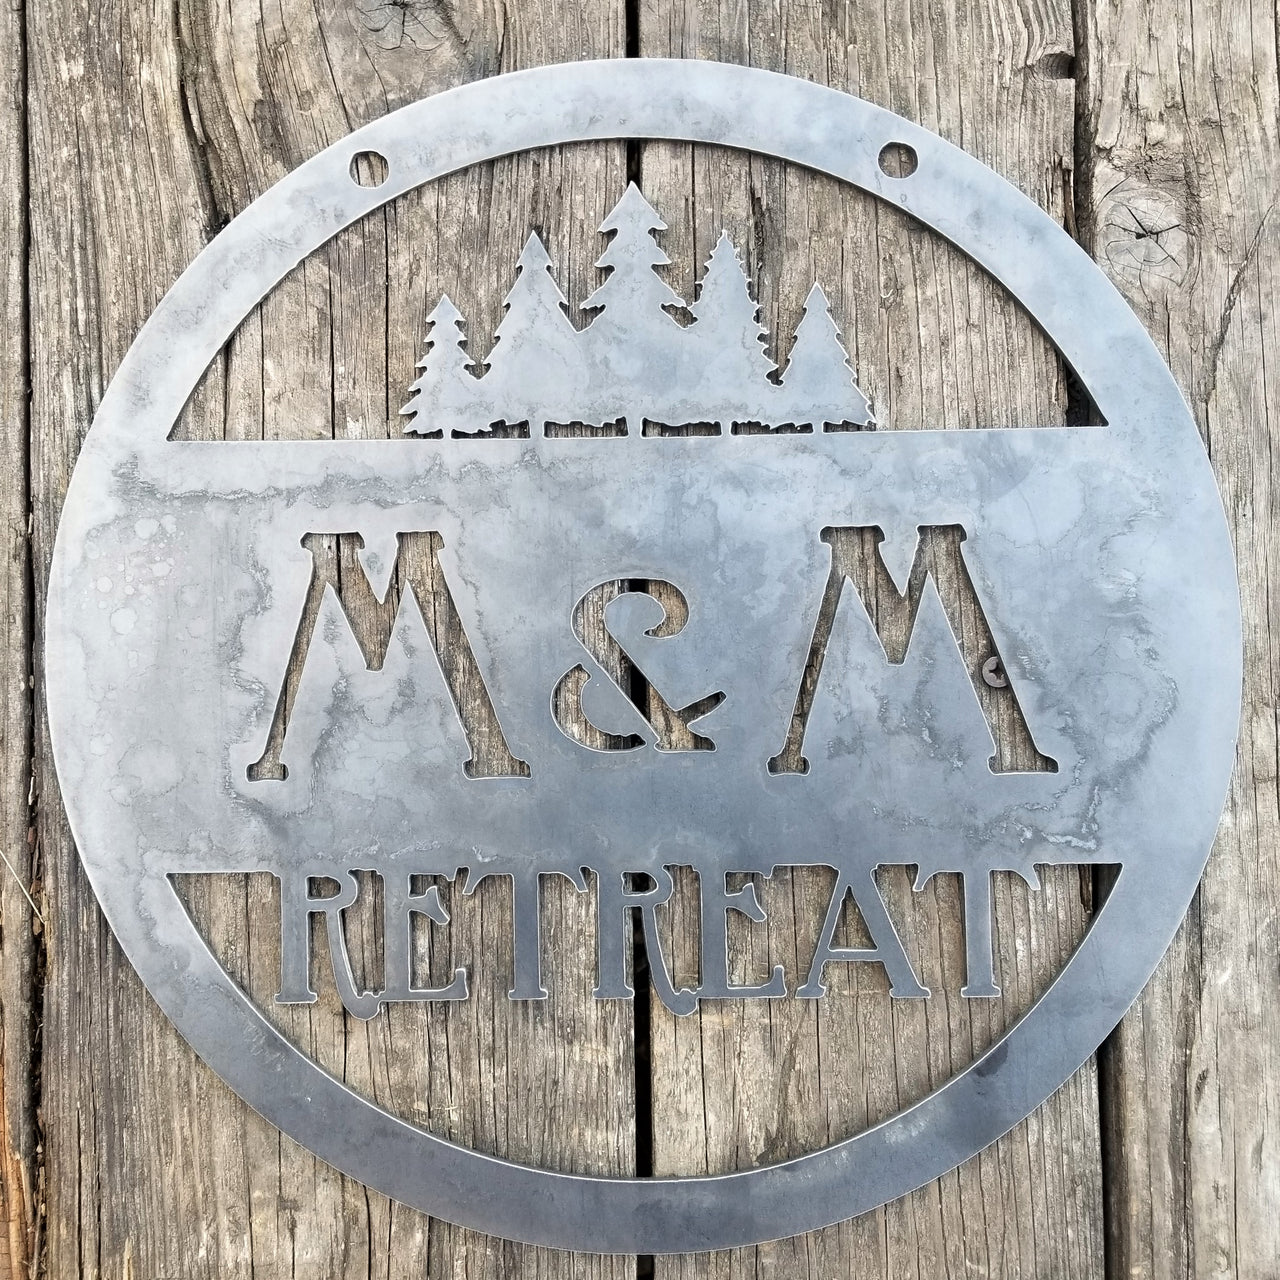 This custom metal sign has a cluster of trees at the top and reads, "M&M Retreat"